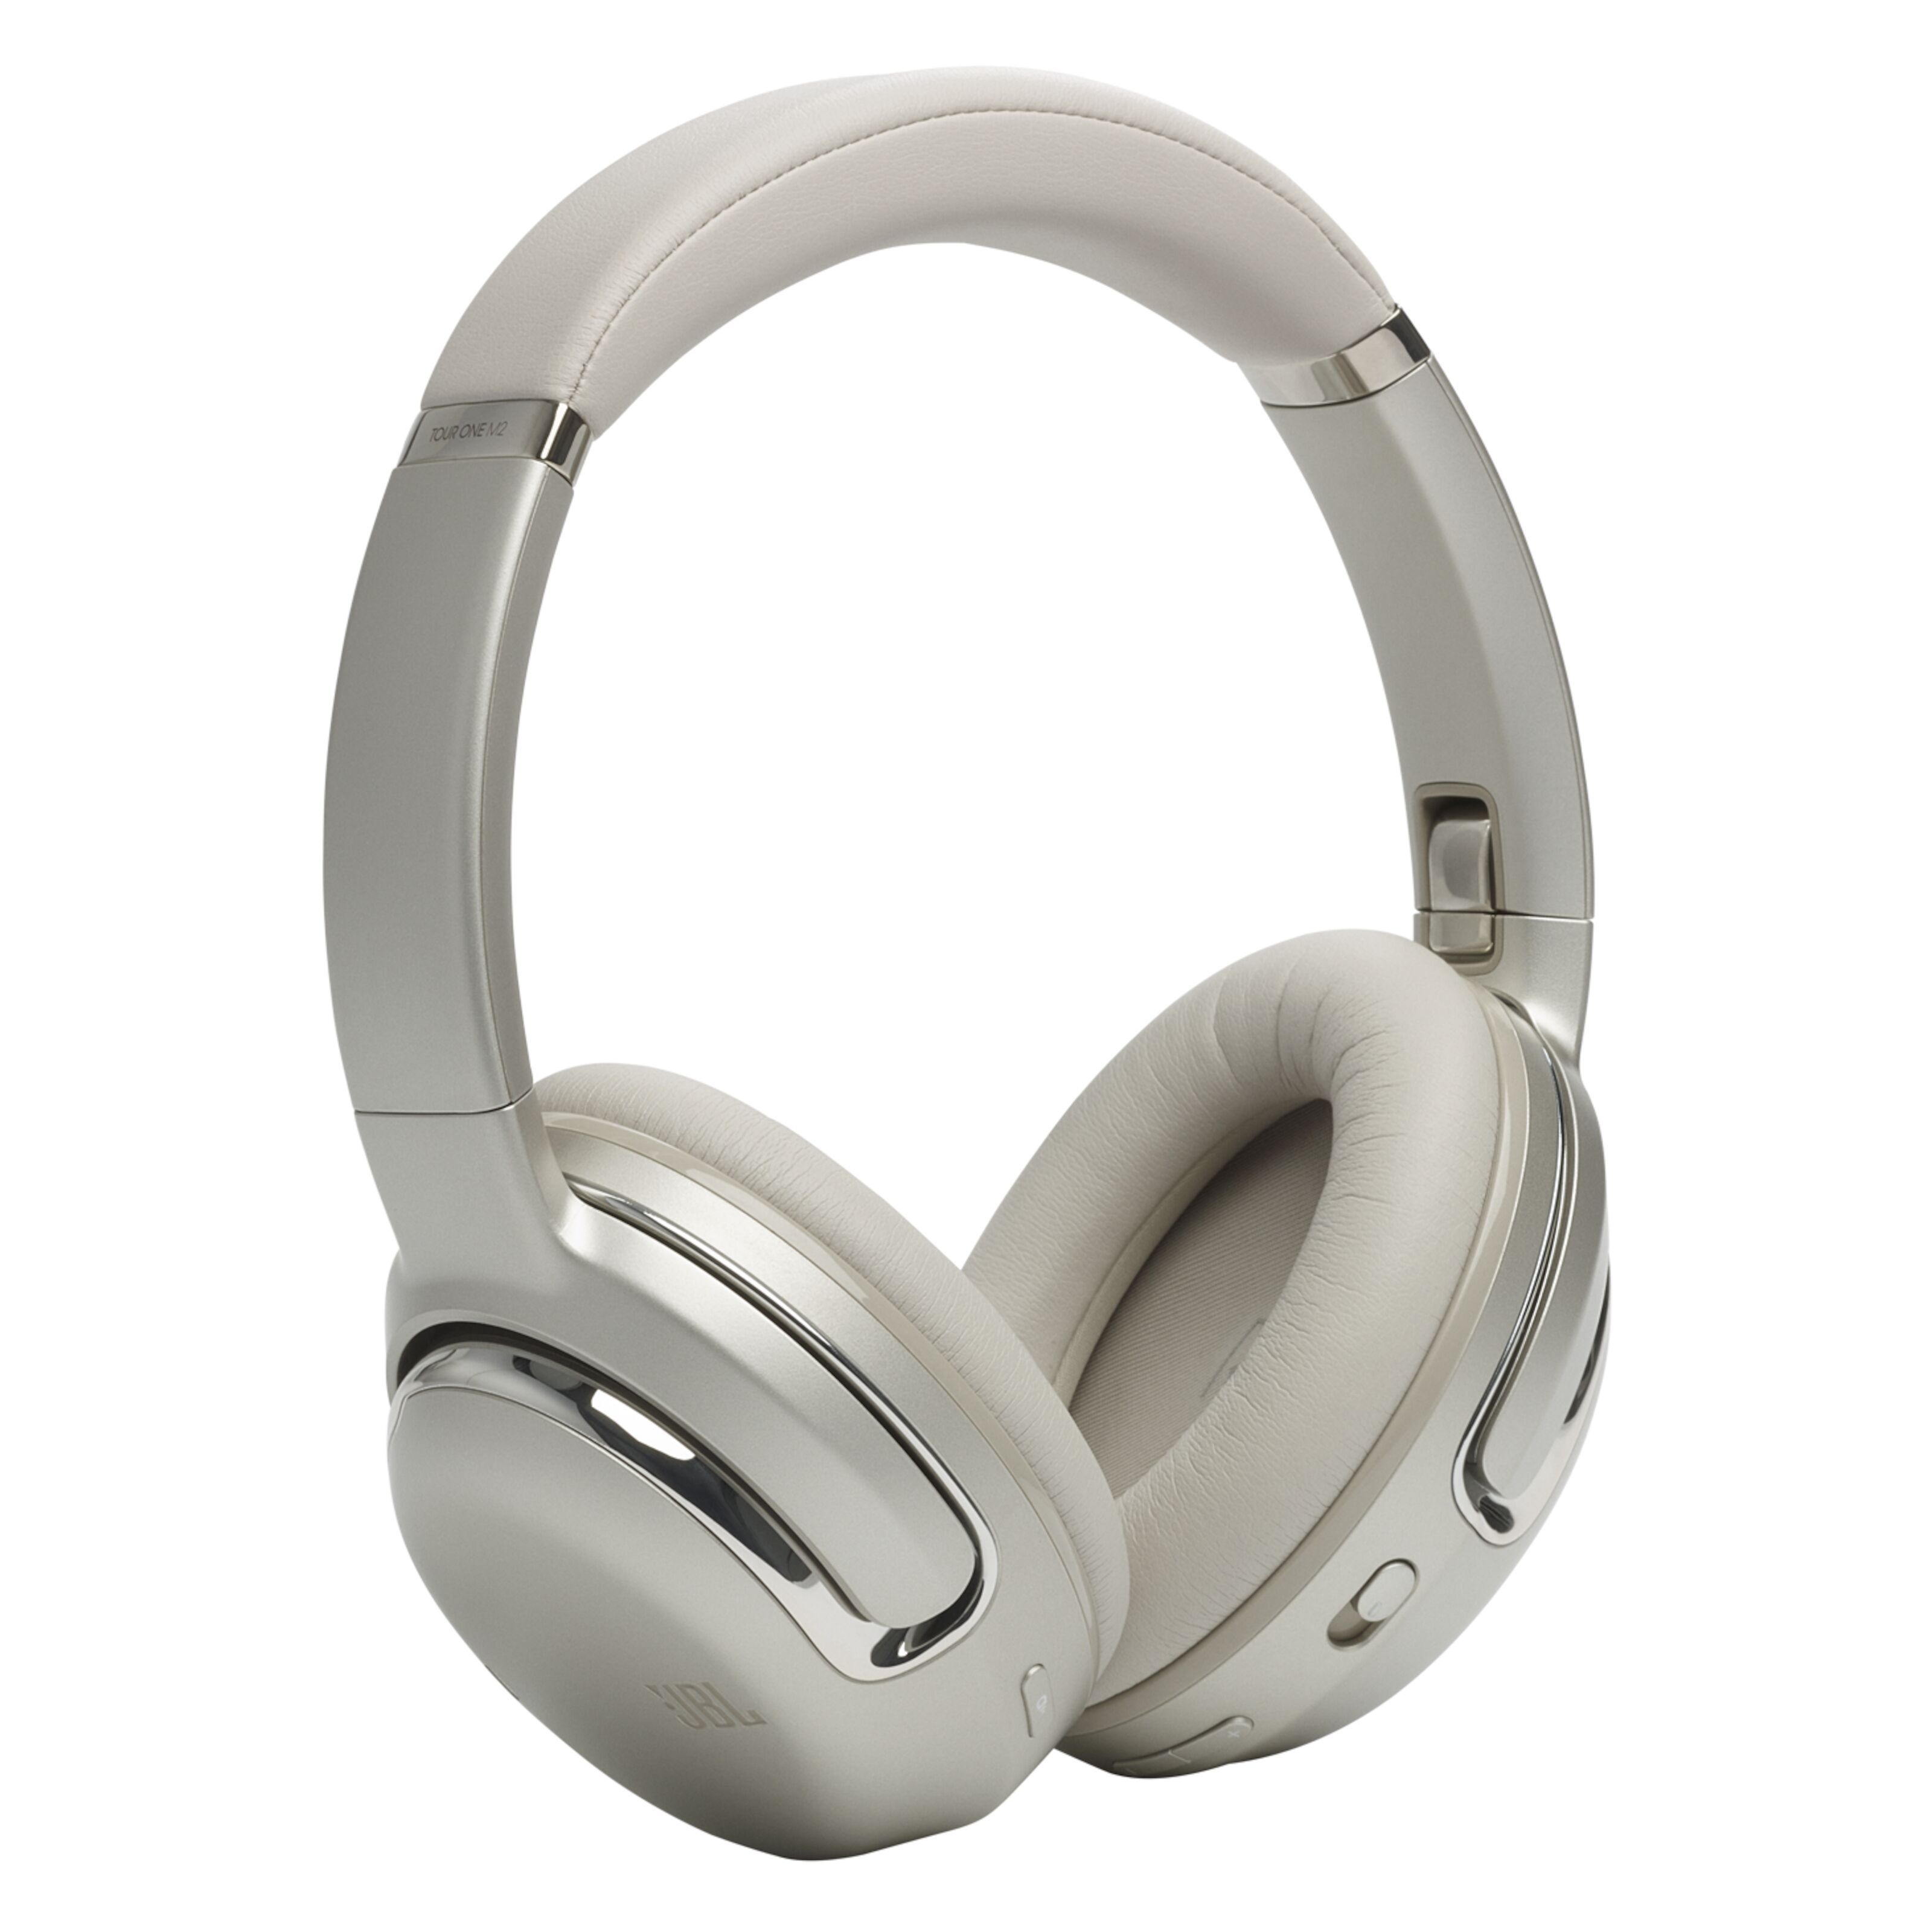 JBL Tour One M2  Wireless over-ear Noise Cancelling headphones